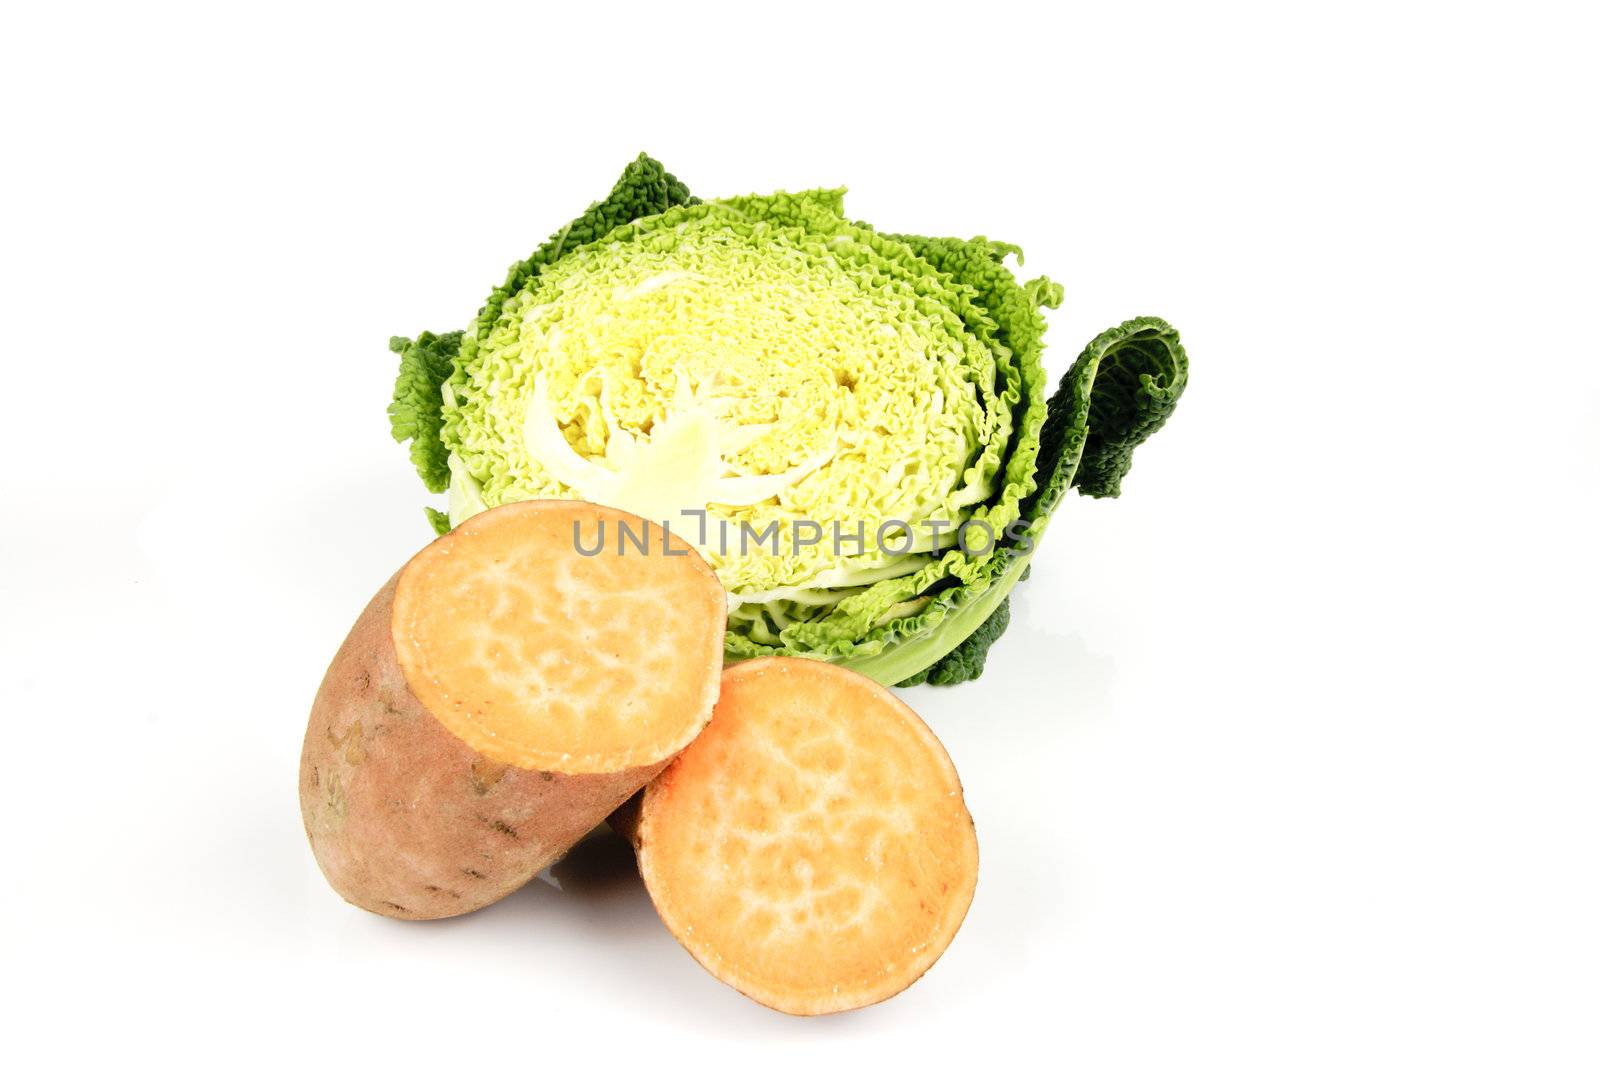 Half a raw green cabbage with a sweet potato cut in half on a reflective white background